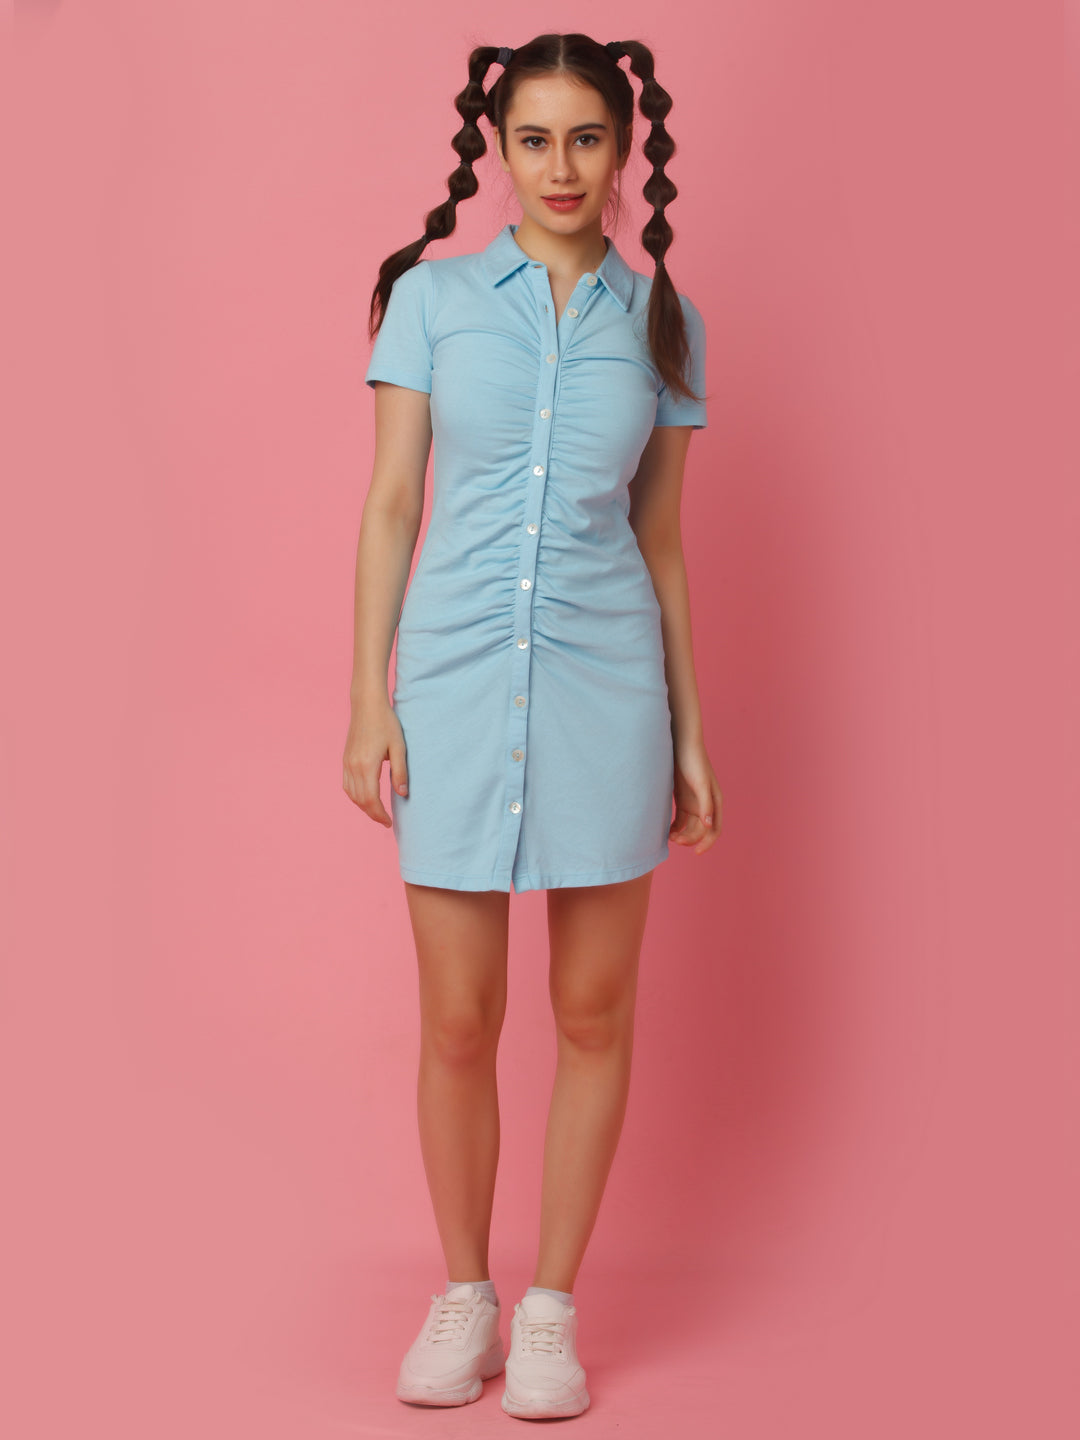 Blue Solid Fitted Shirt Style Short Dress For Women